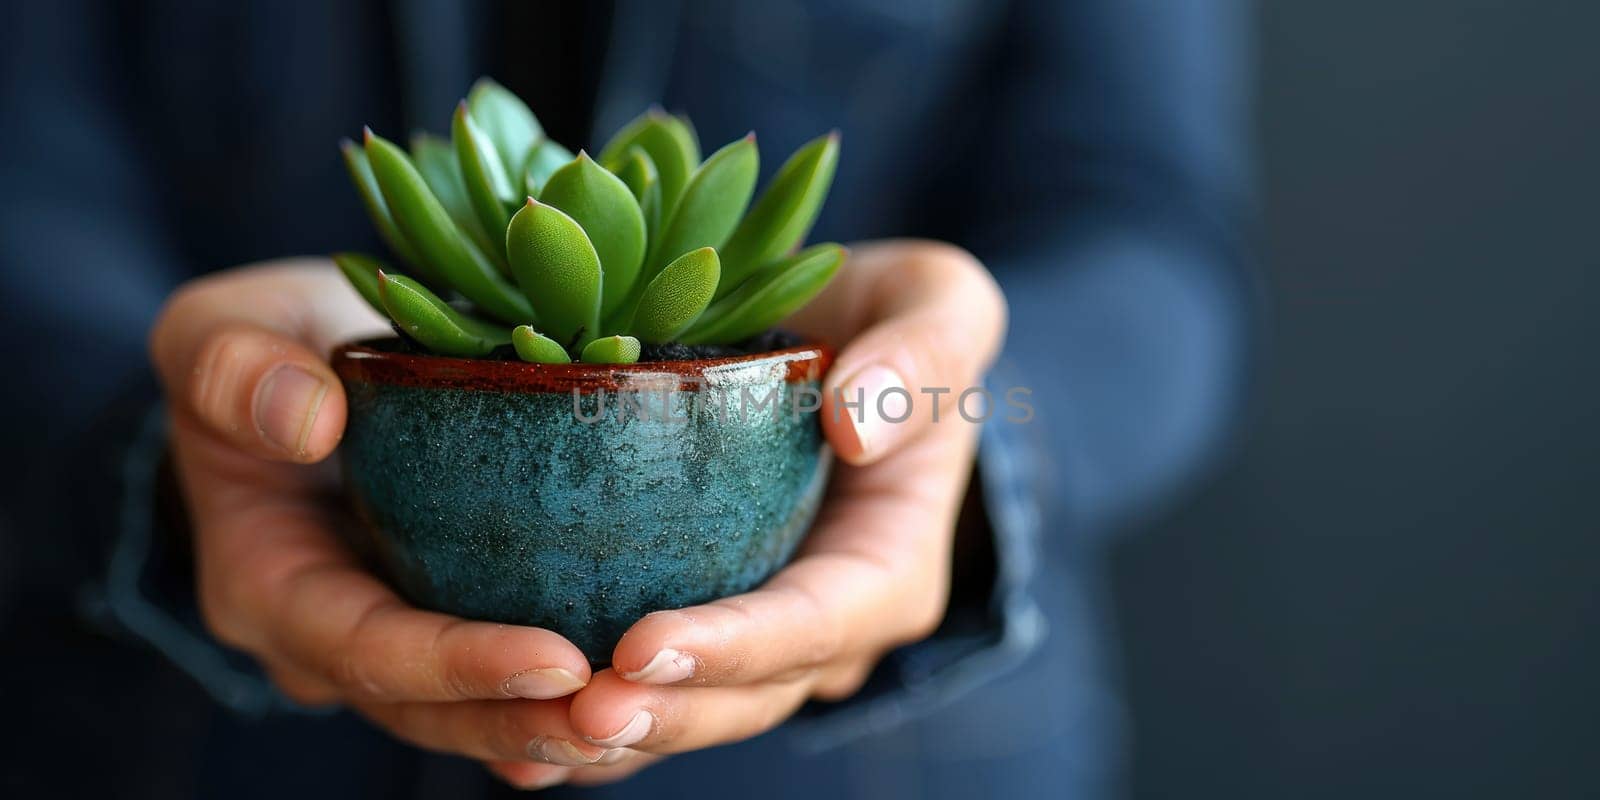 A person is holding a small plant in a blue pot.